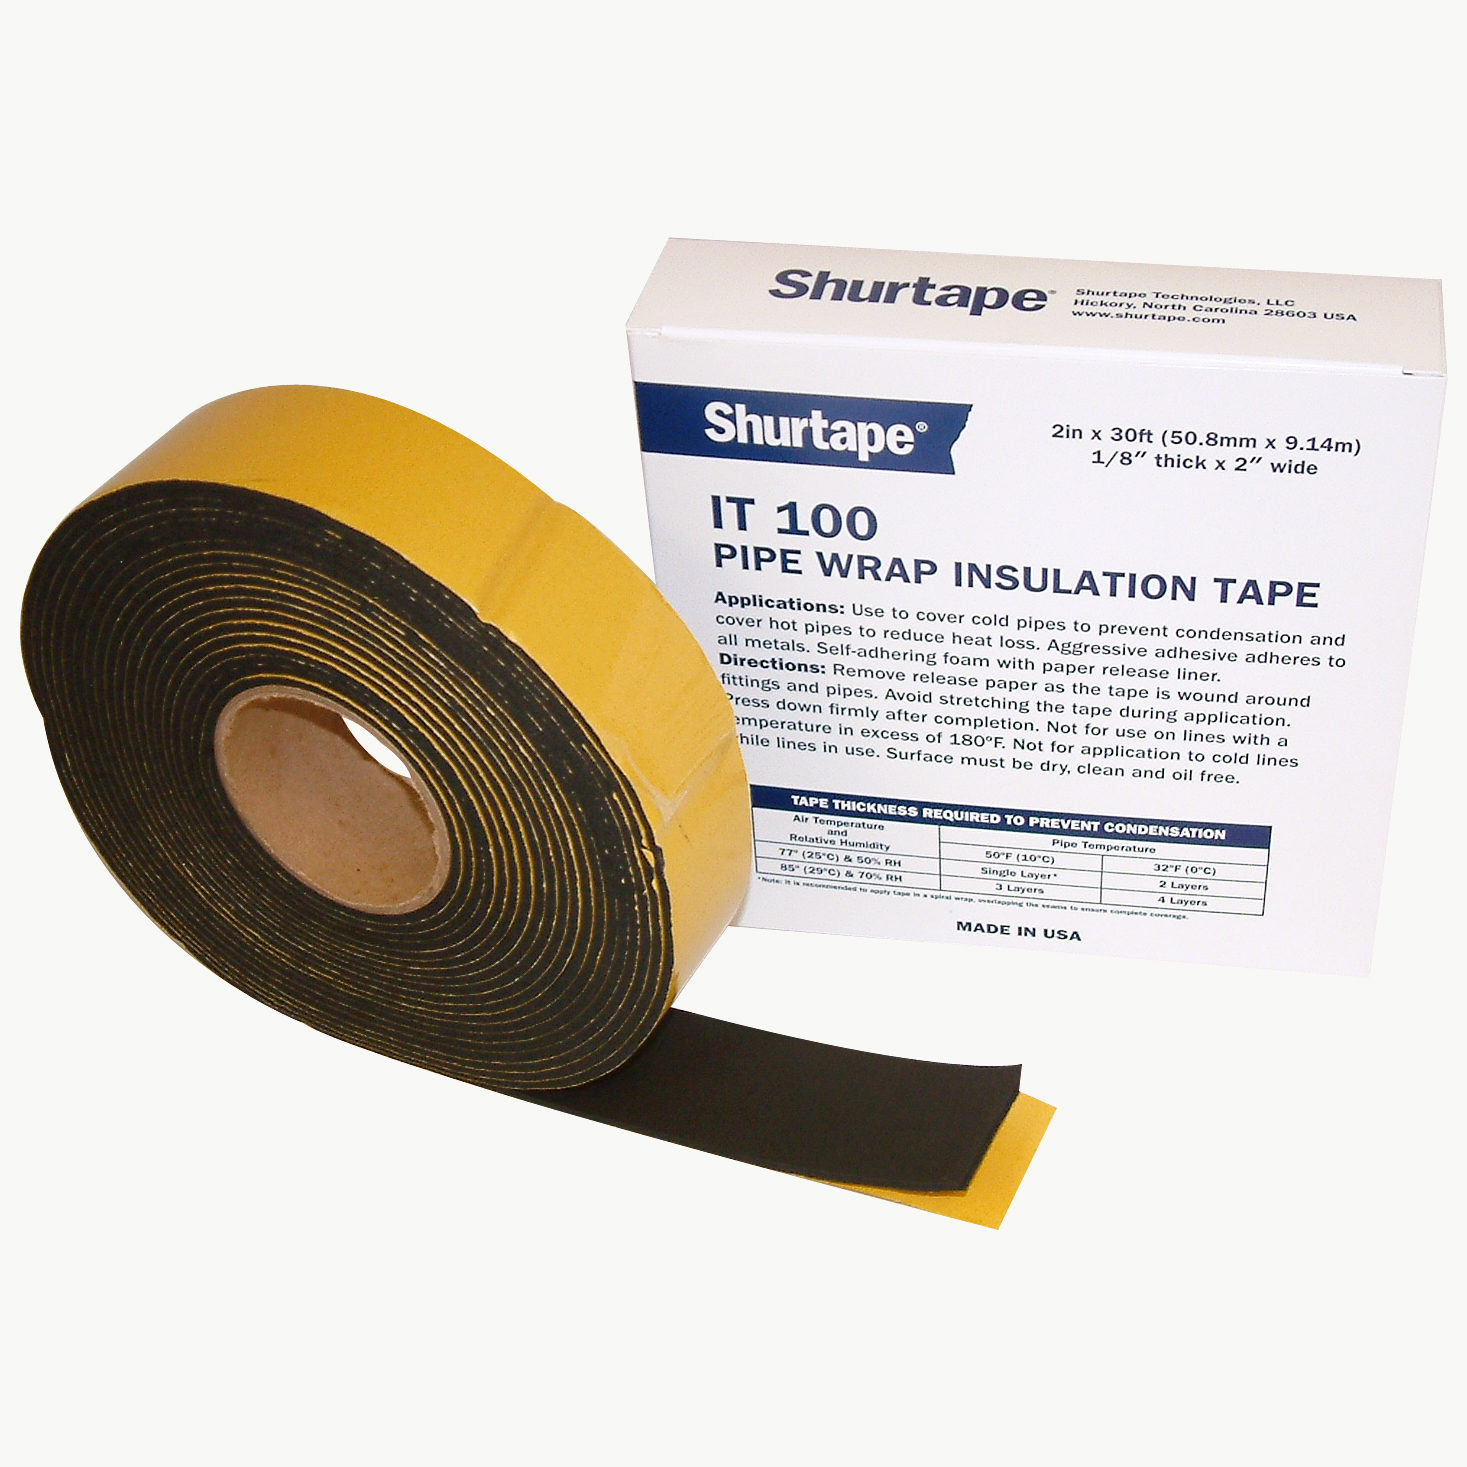 Shurtape IT-100 Condensation-Inhibiting Foam Pipe Wrap Insulation Tape [Discontinued]